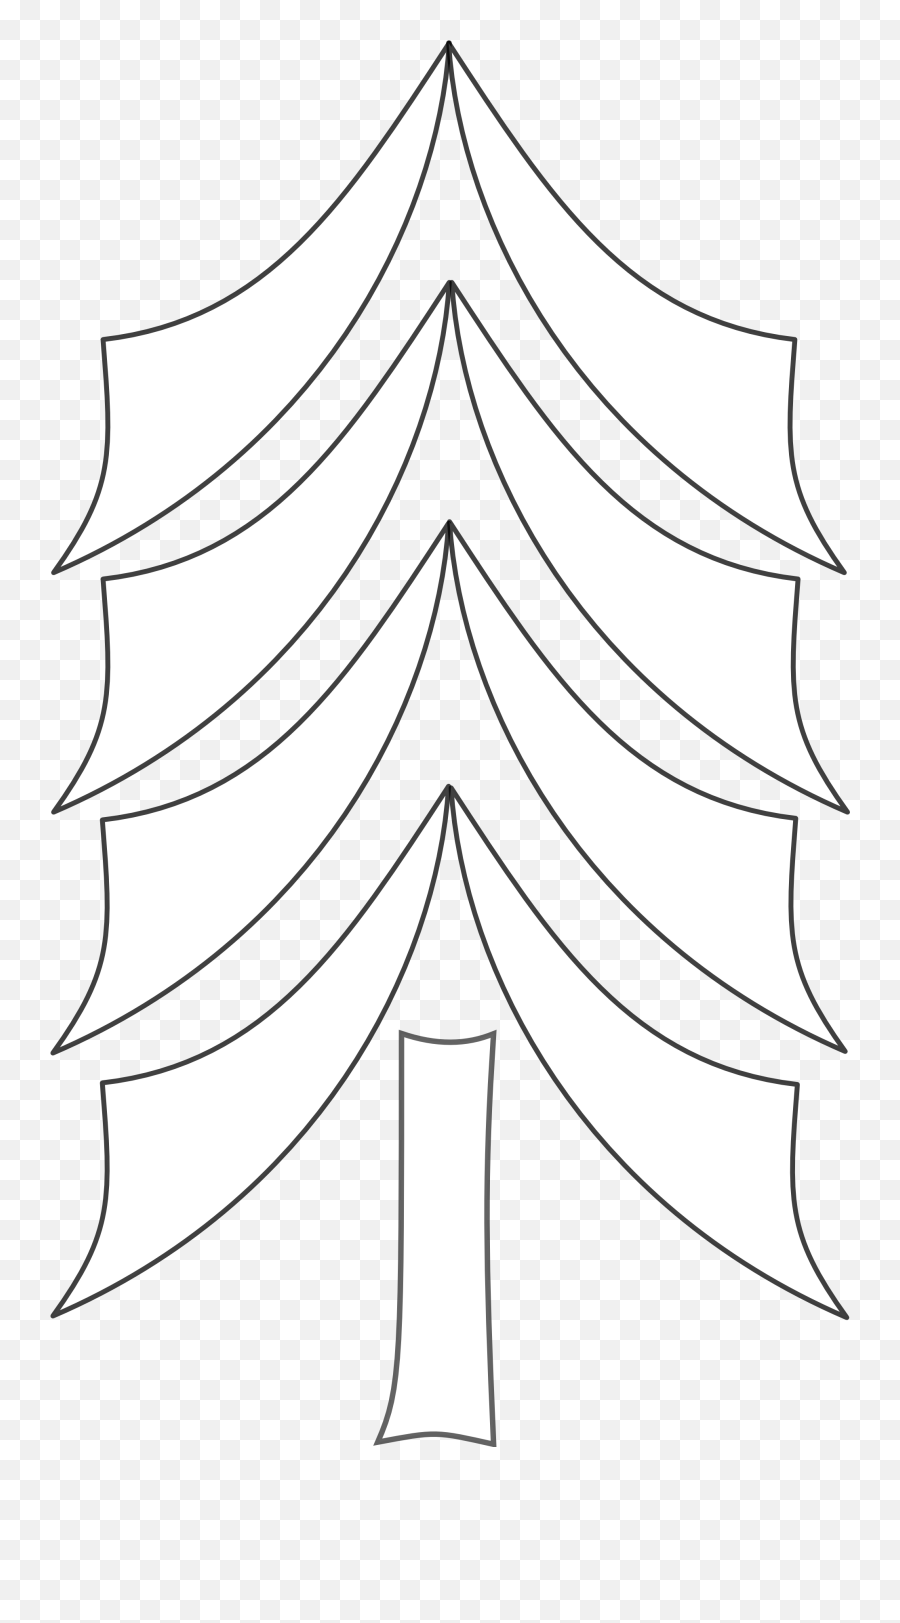 Black And White Christmas Tree - Clipart Best Language Emoji,Christmas Tree Clipart Black And White